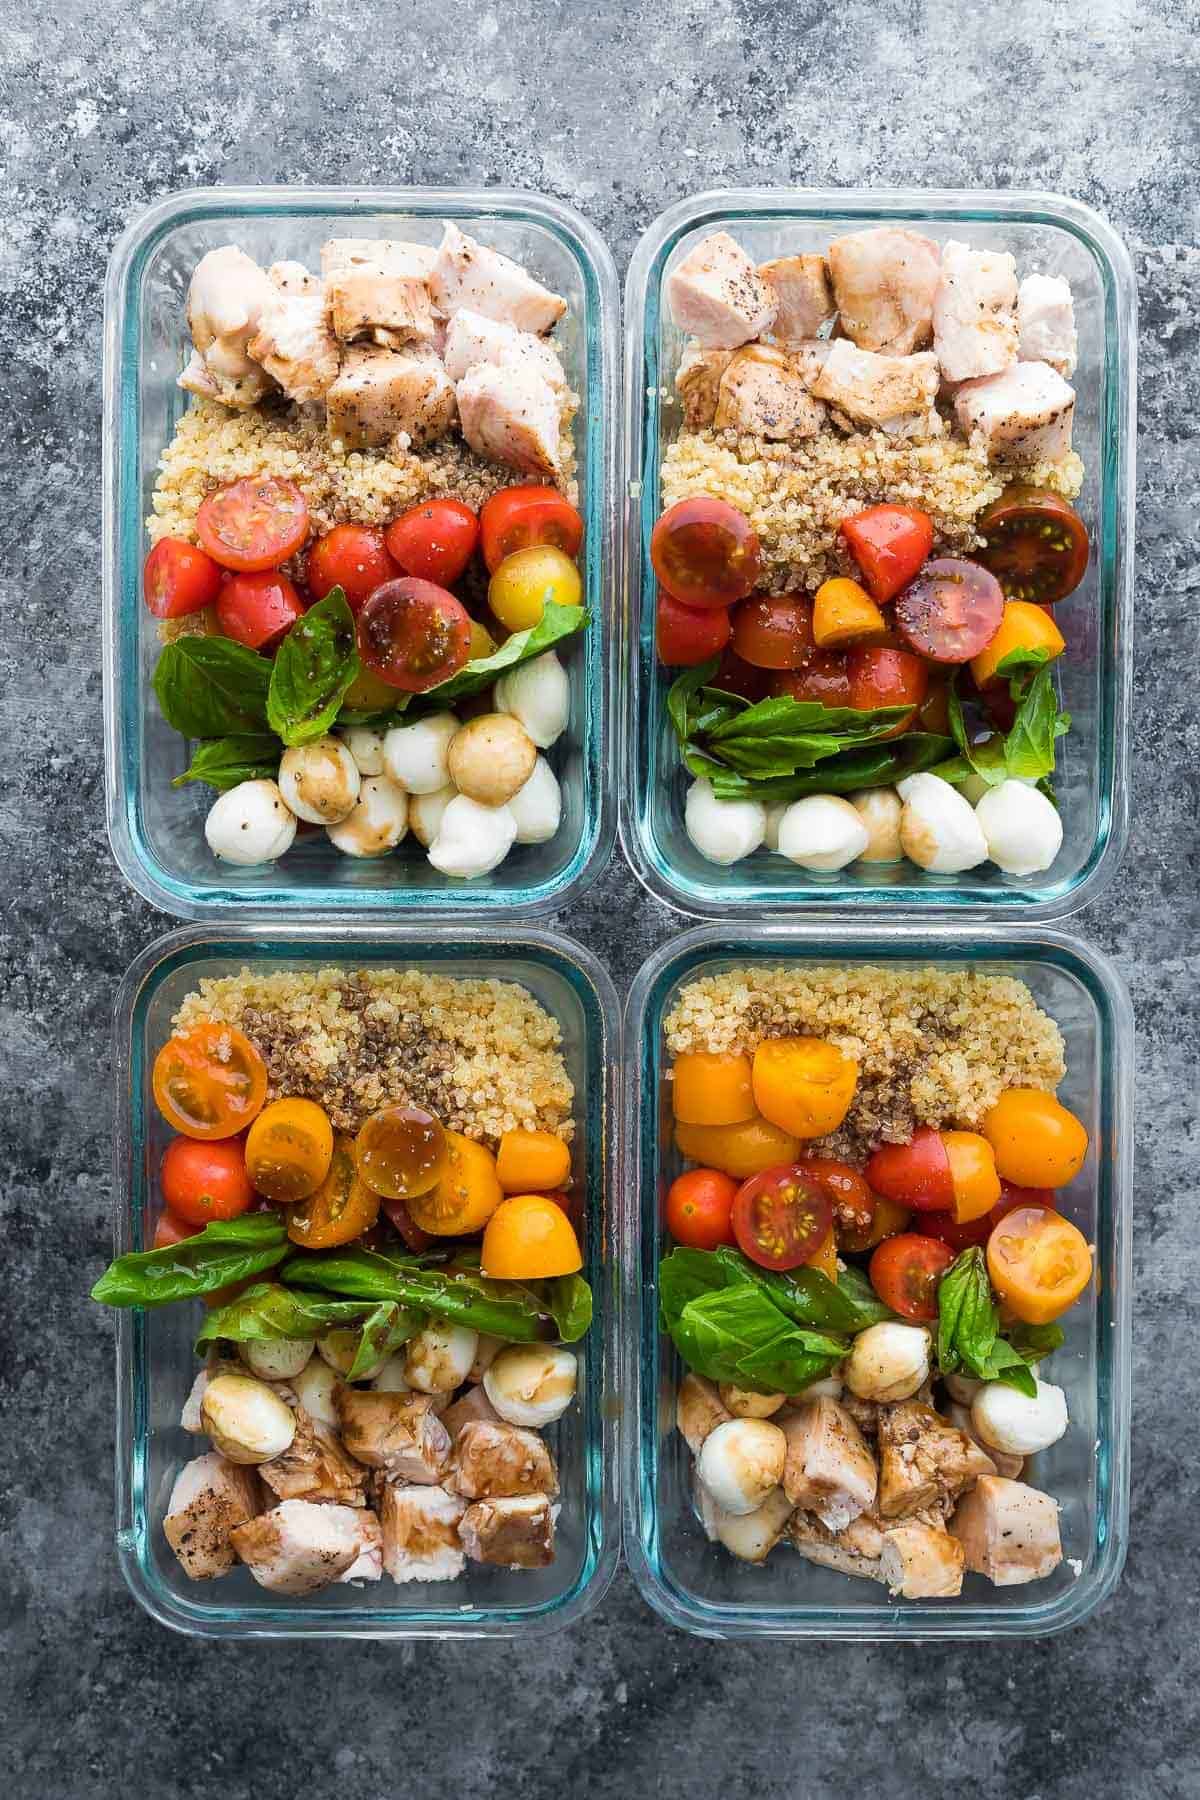 Healthy Lunches To Take To Work